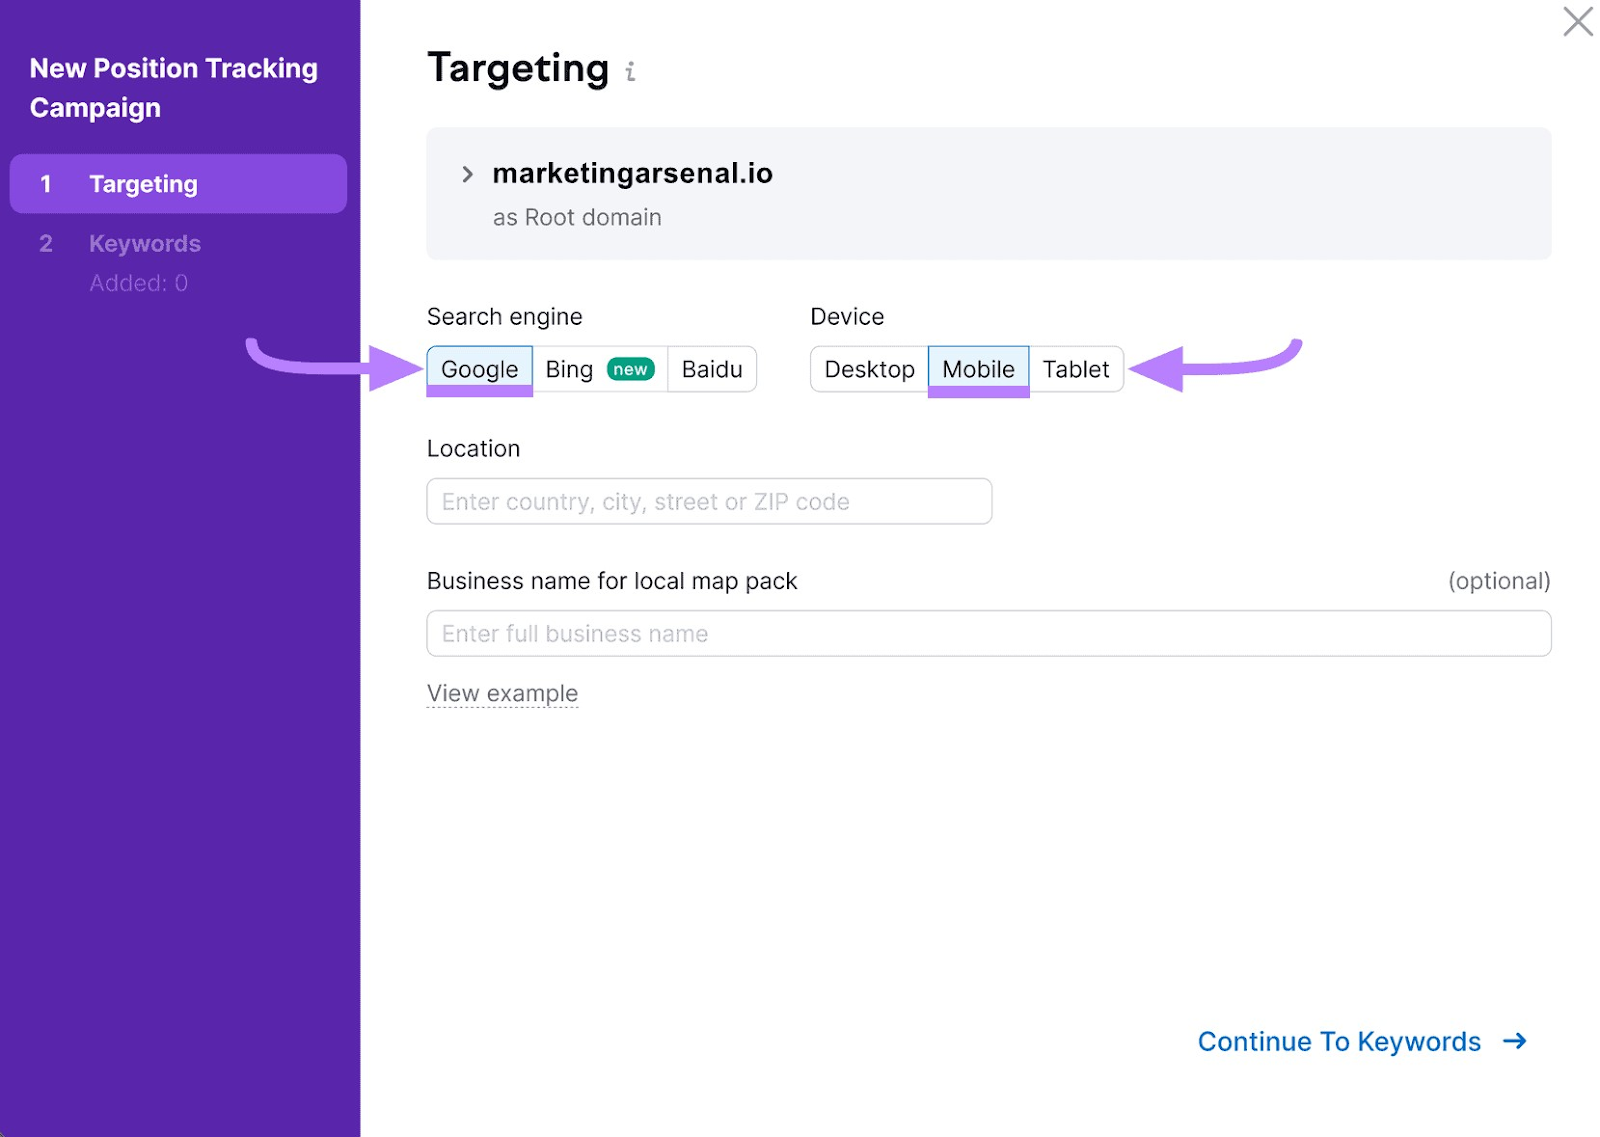 "Targeting" screen in Position Tracking settings